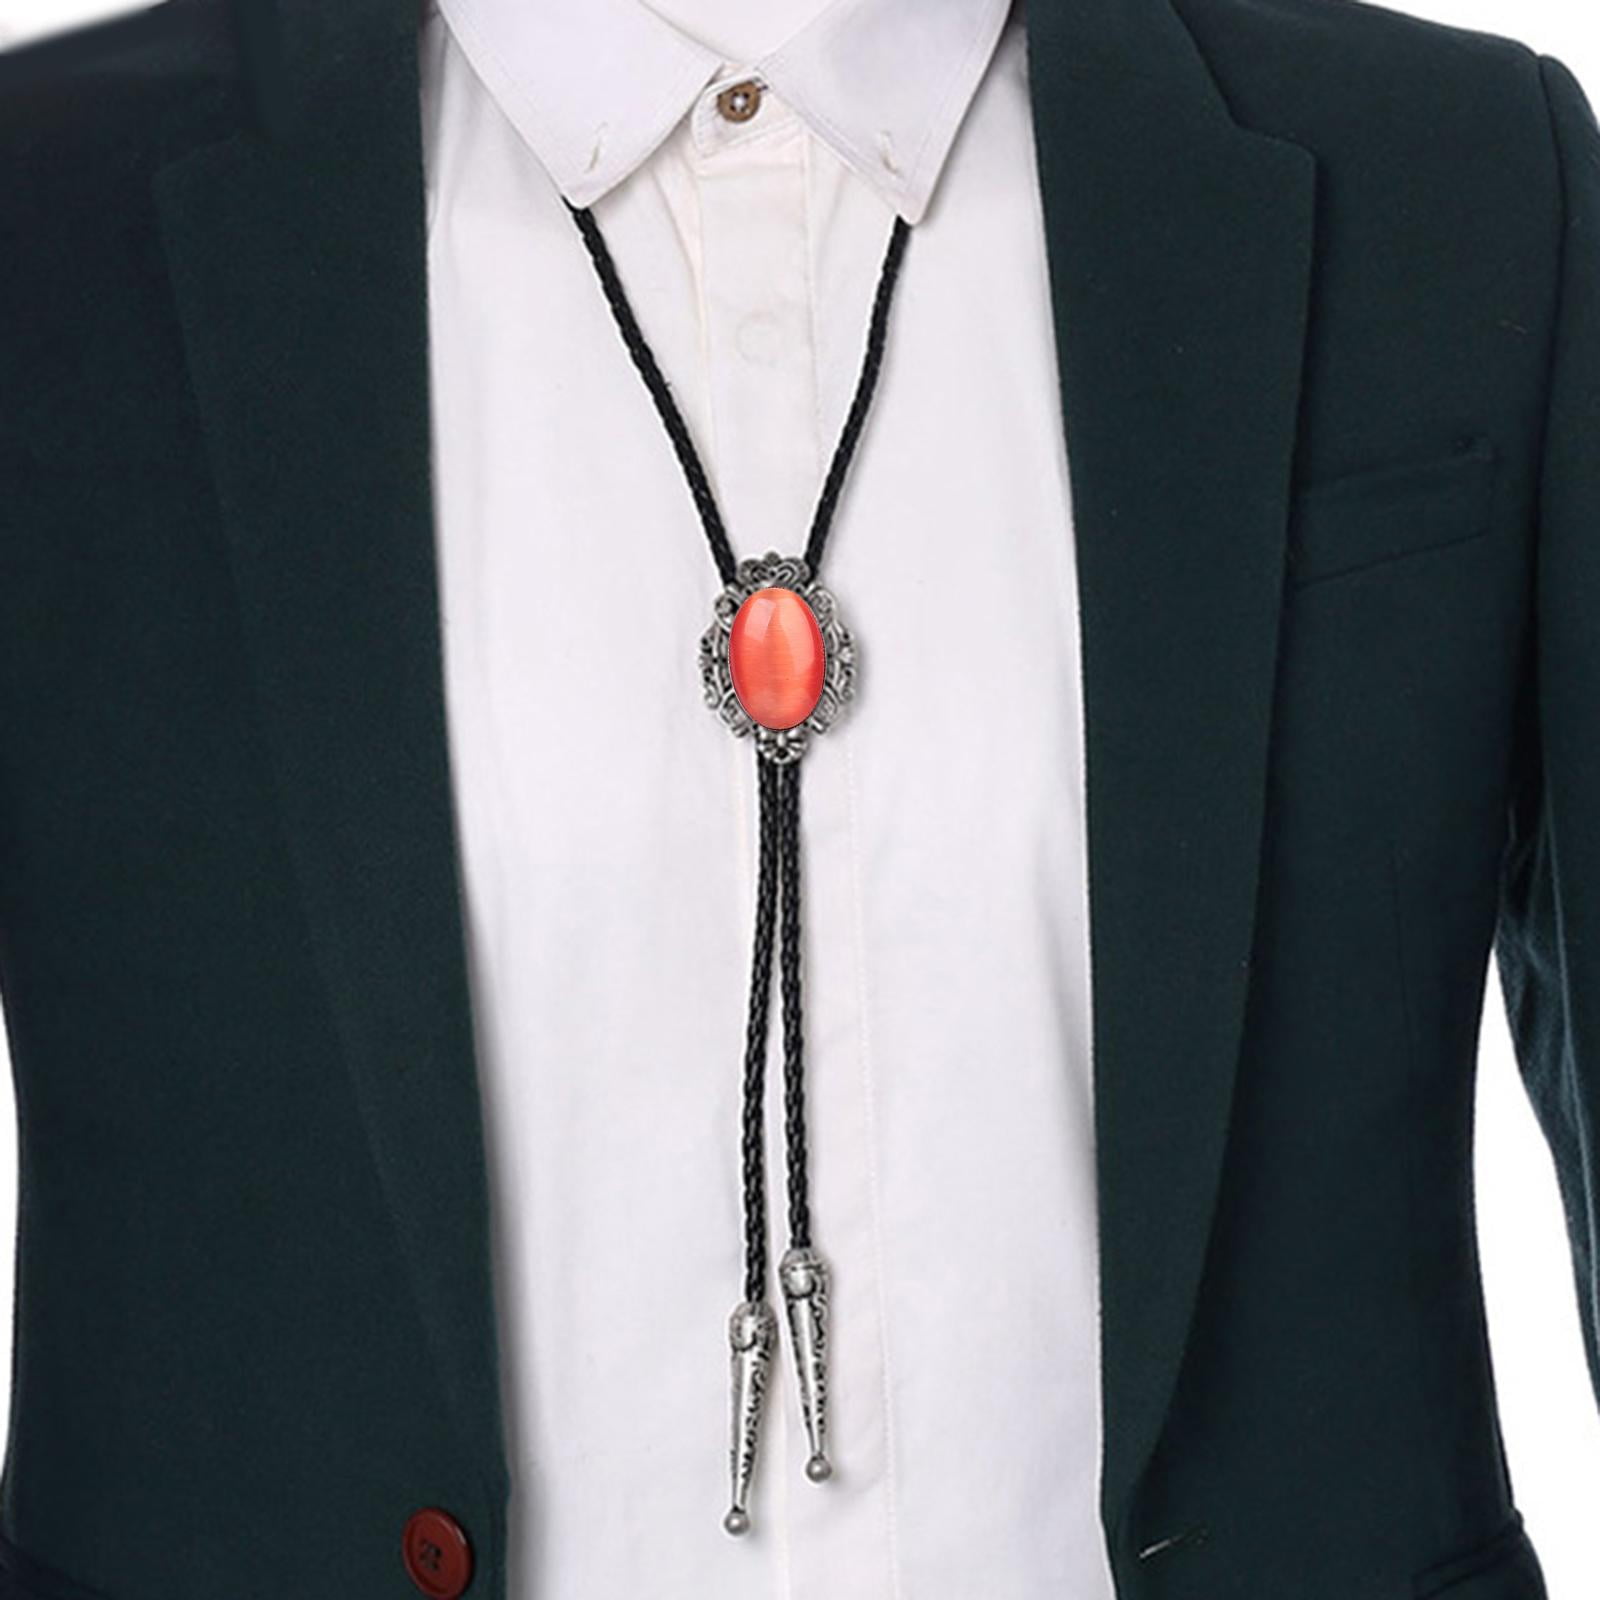 Bolo Tie Sweater Chain/ Adjustable Oval PU Leather Rope Western Cowboy Vintage Costume Accessories/ Necklace Necktie for Party Men , Bronze, Men's